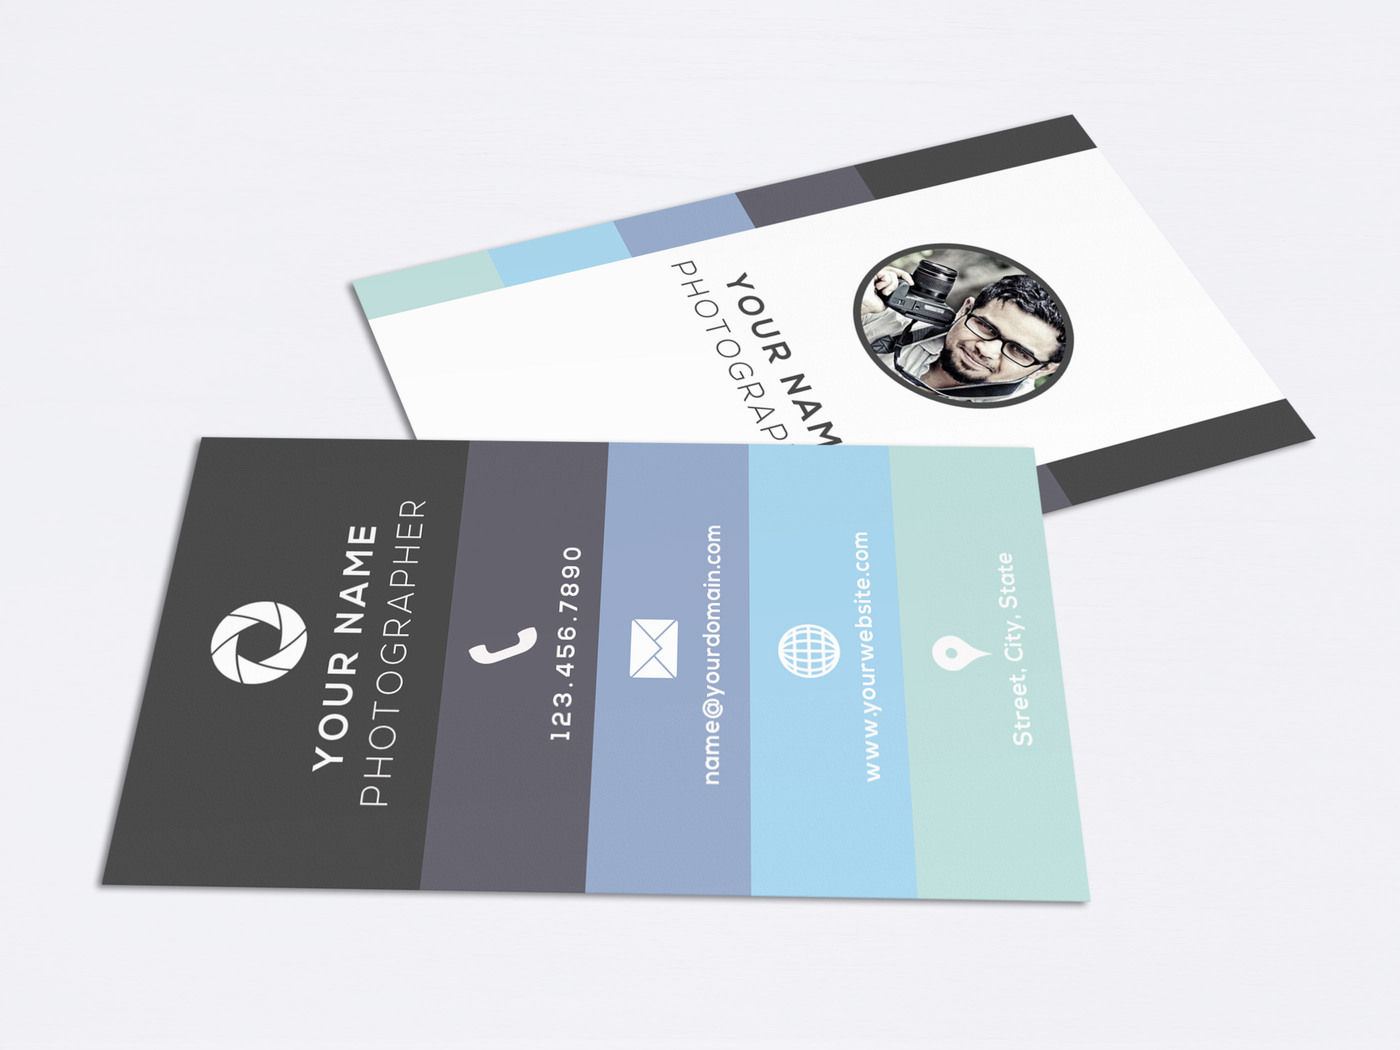 Business Card Template 004 Photoshop By NM-Design-Studio ...